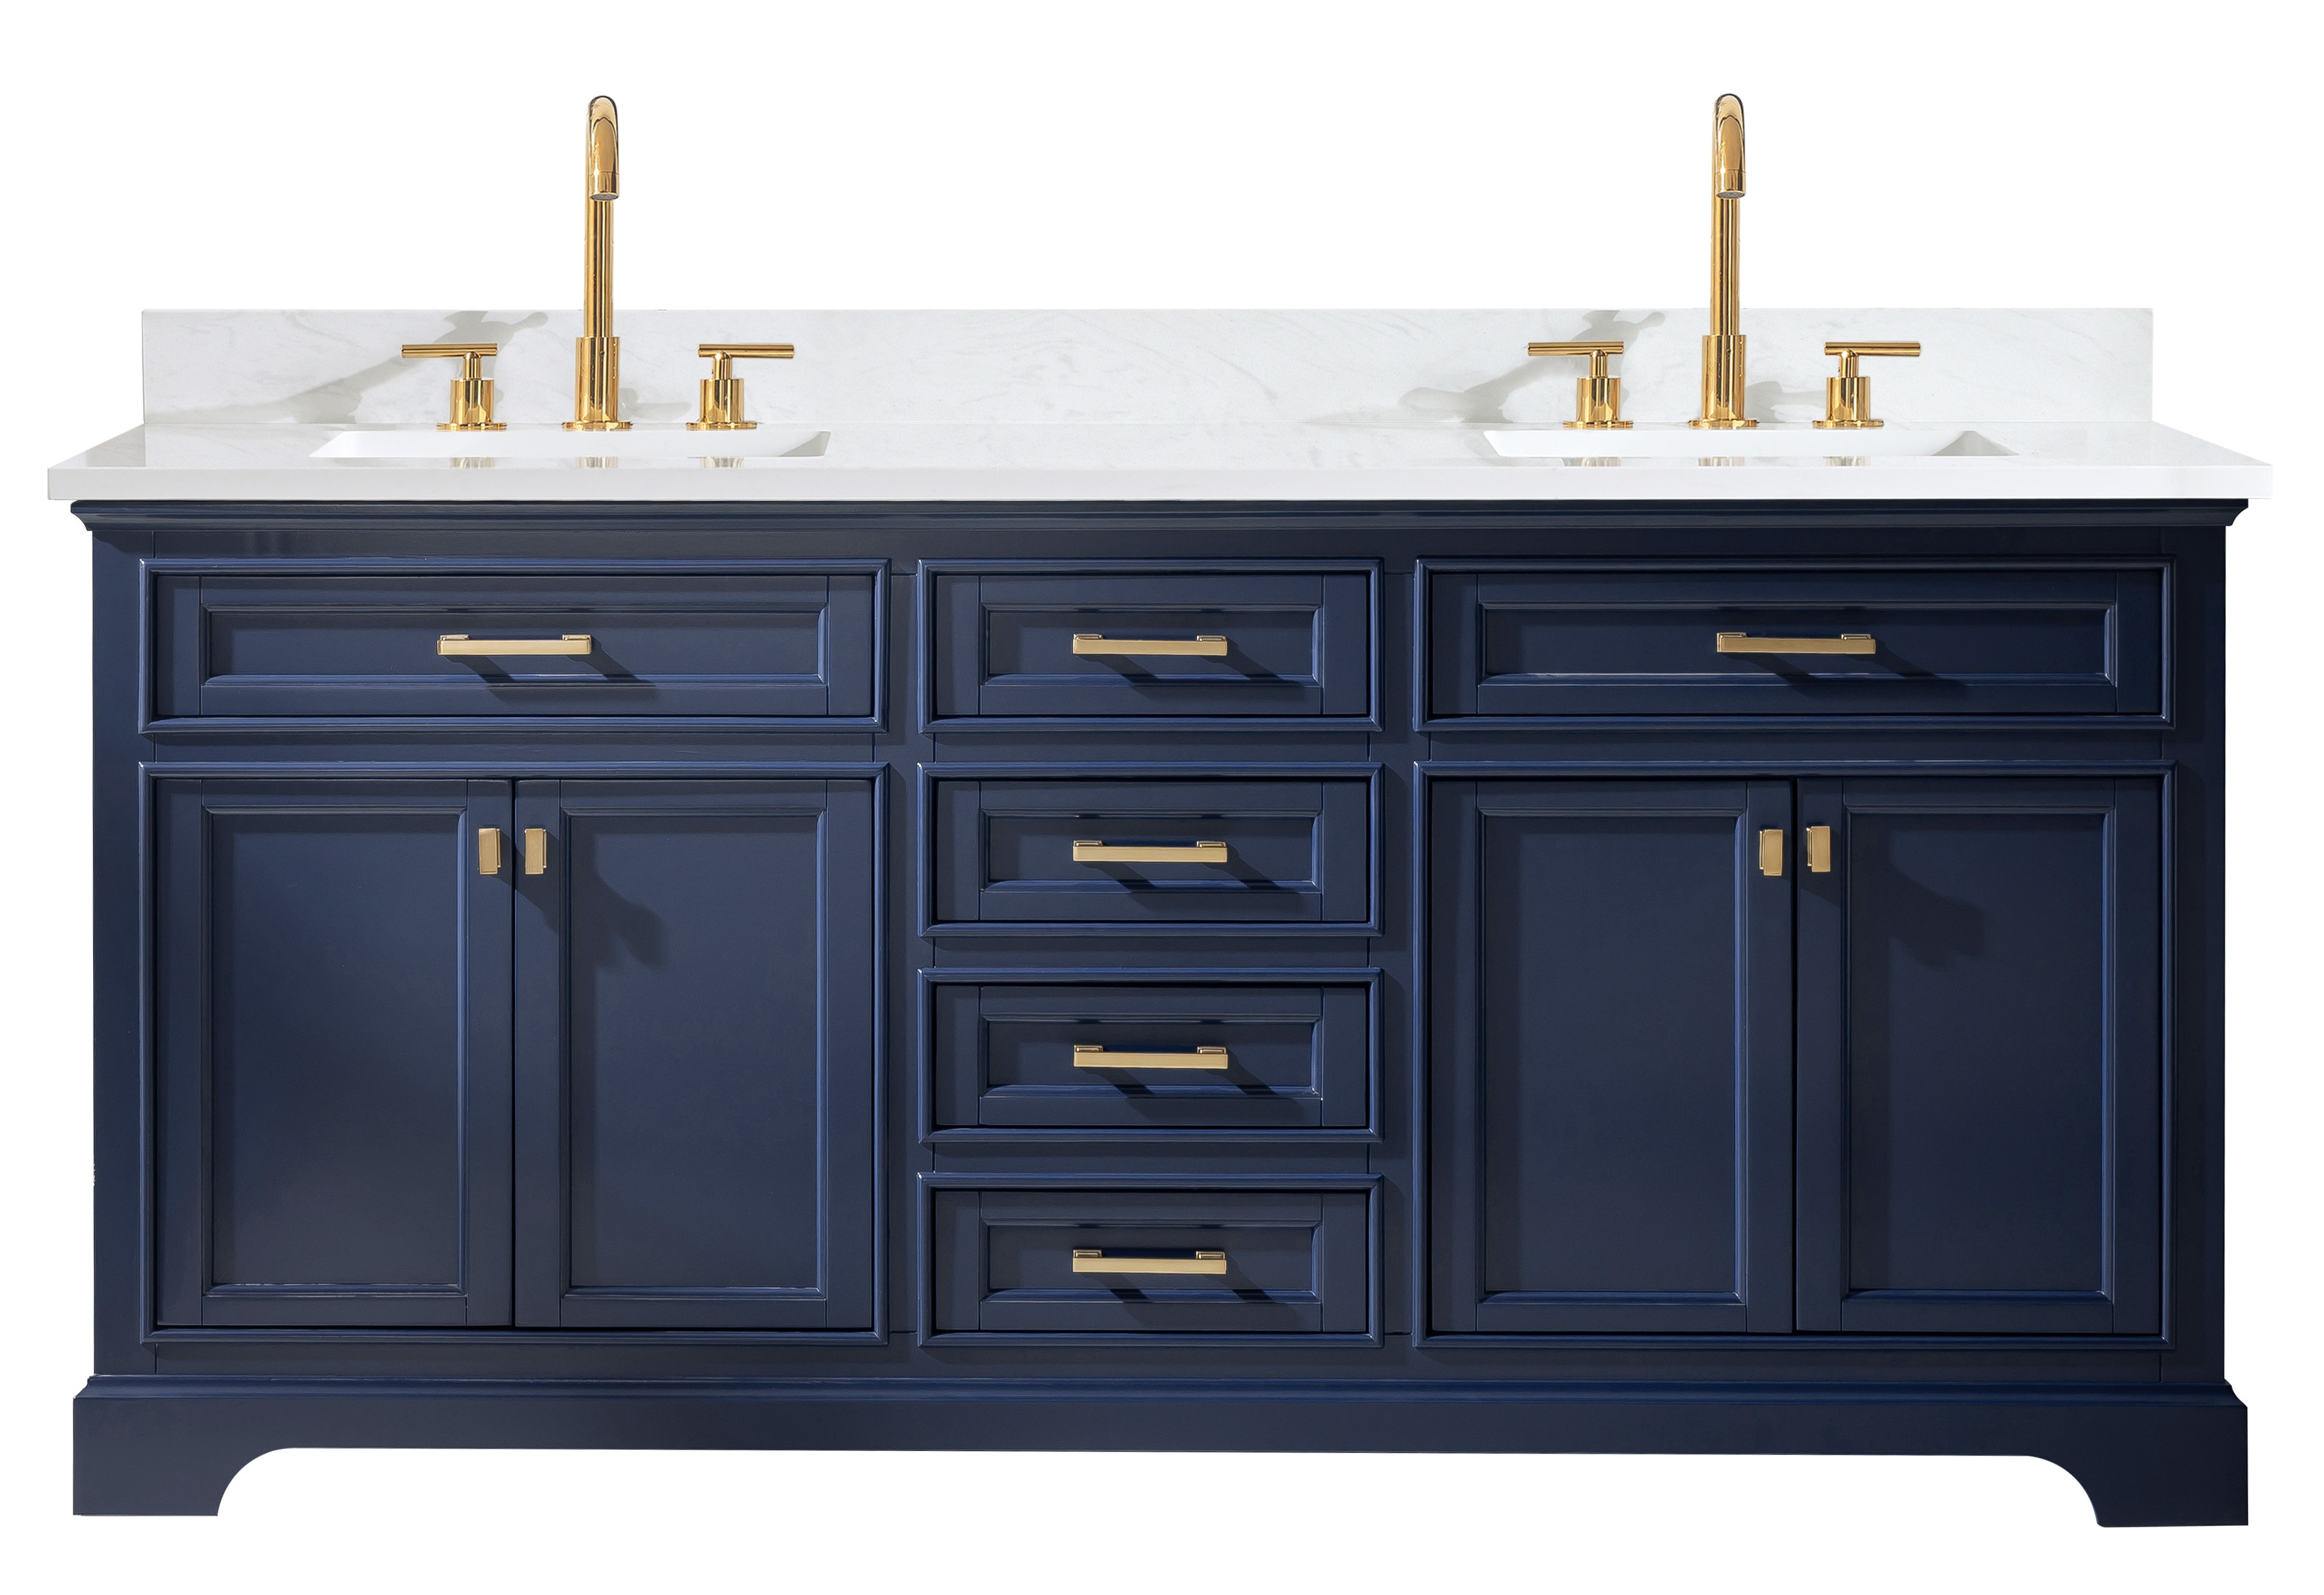 Transitional 72" Double Sink Vanity with 1" Thick White Quartz Countertop in Blue Finish